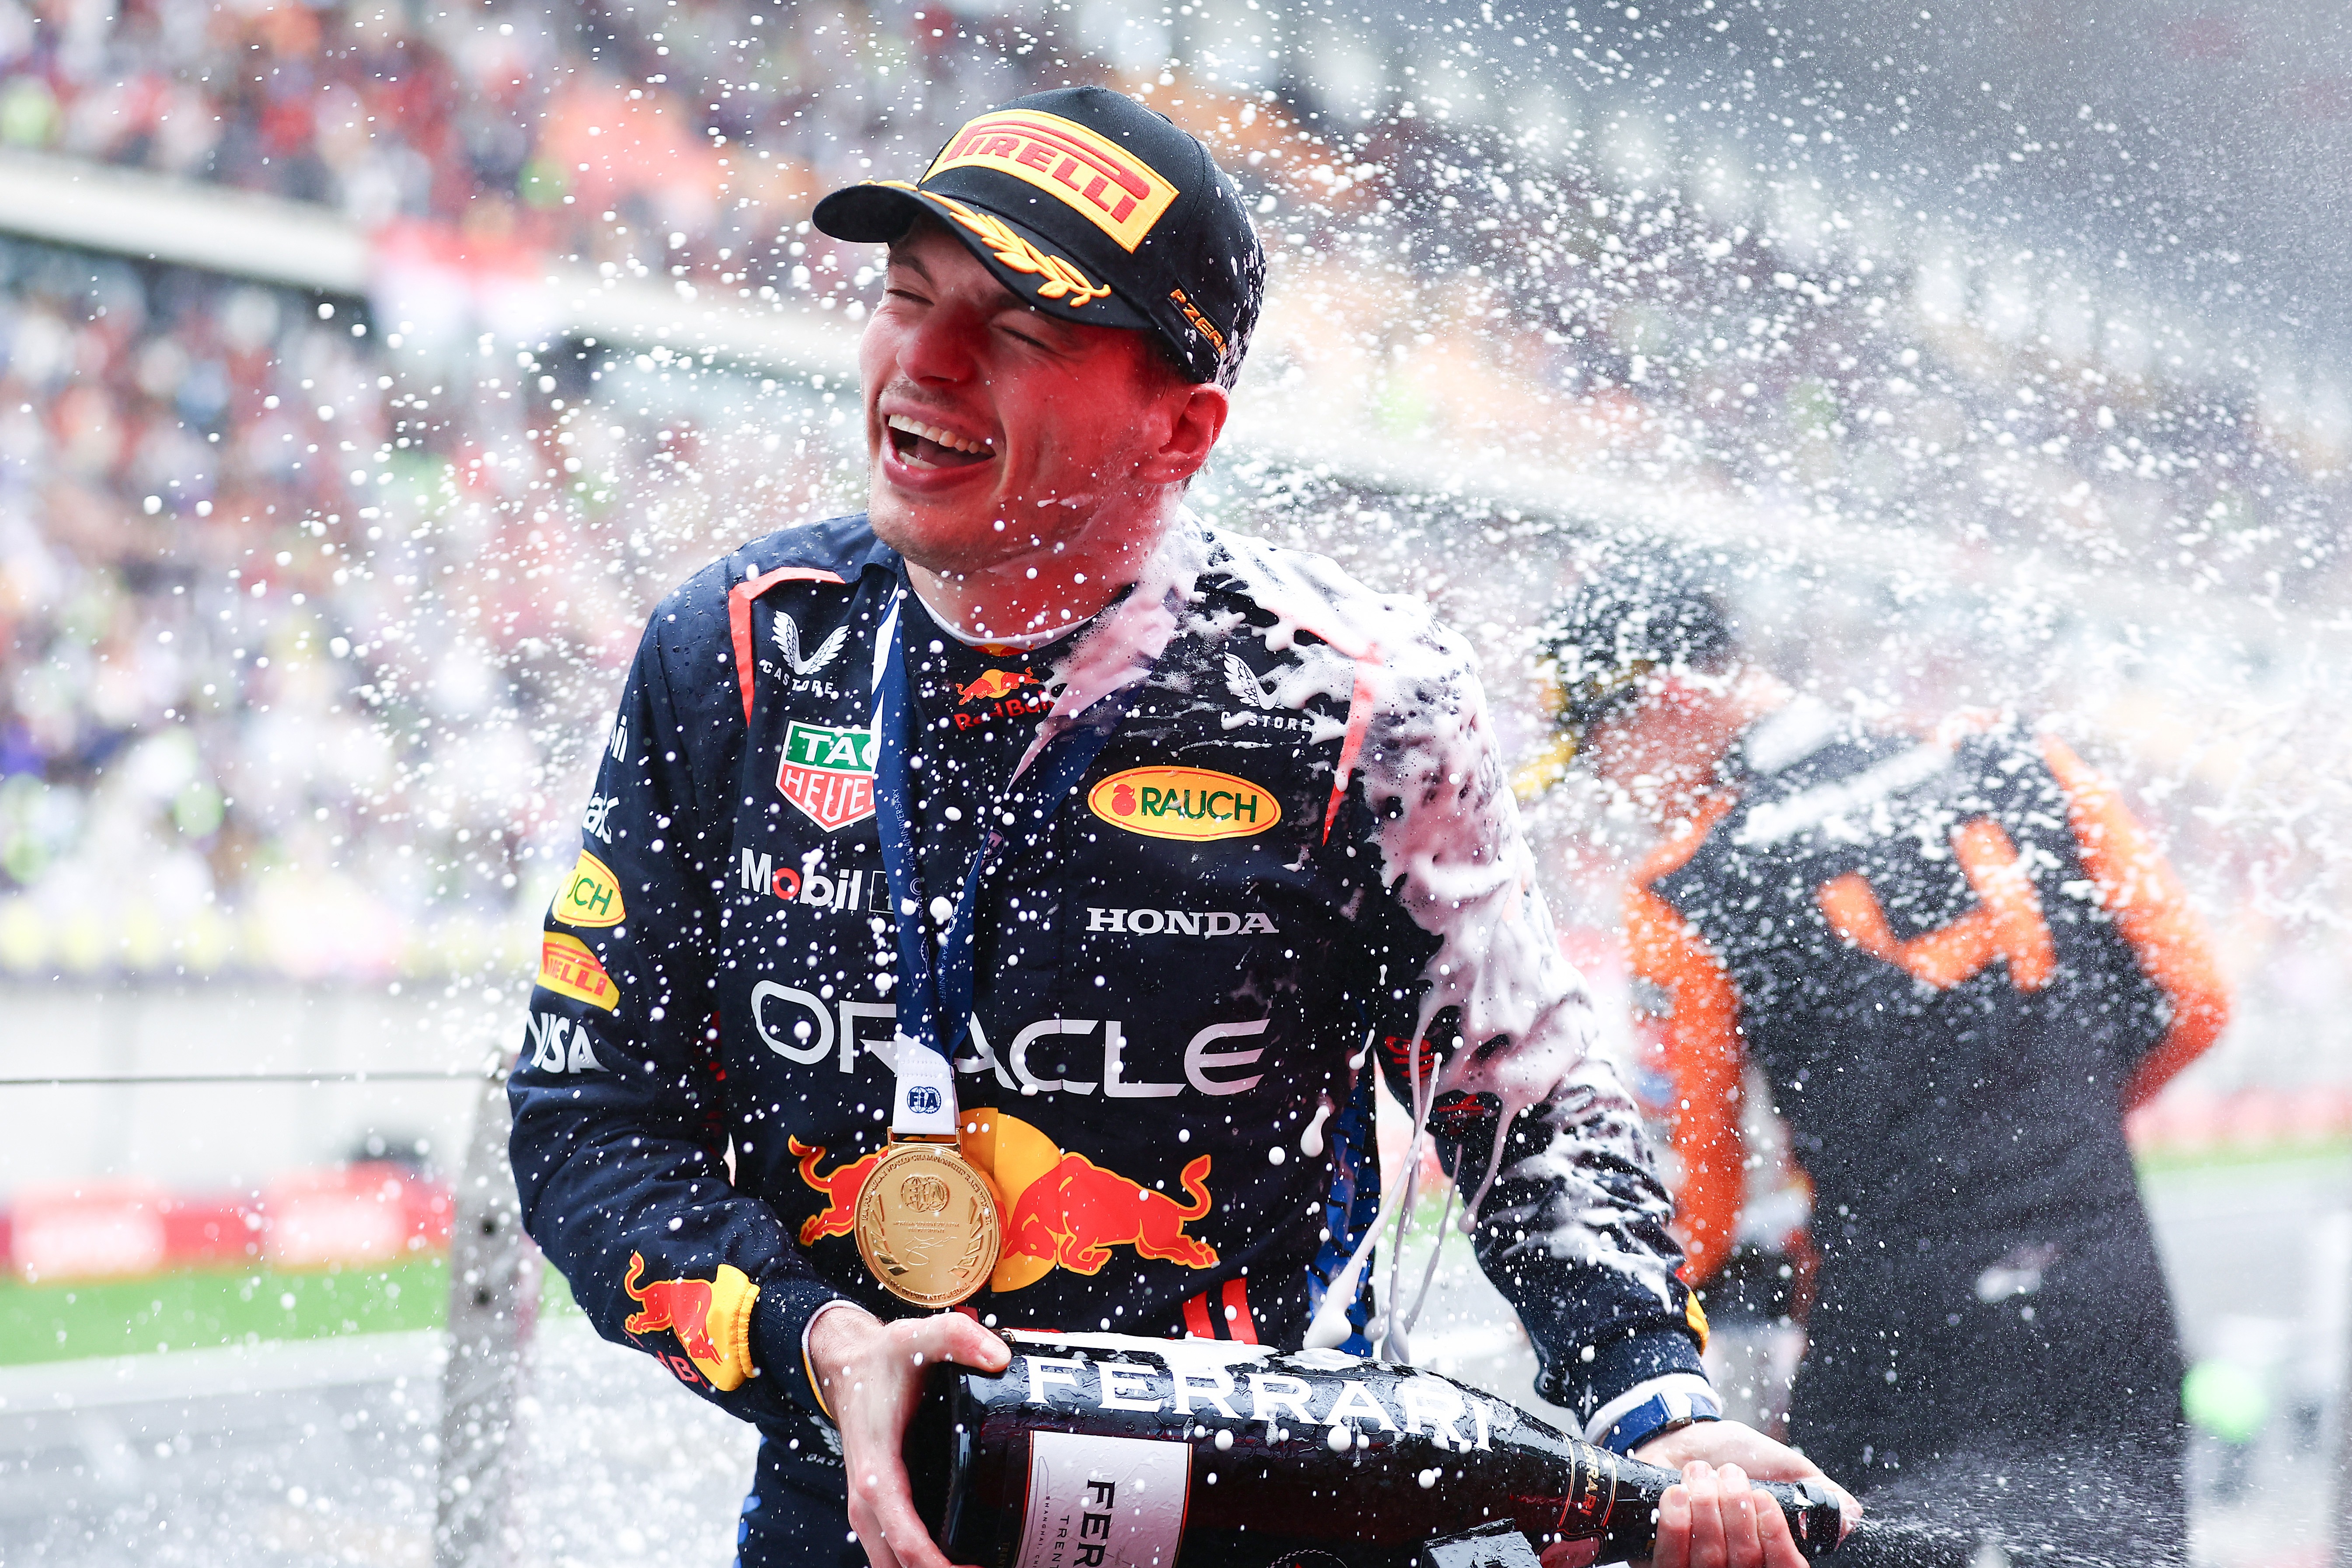 Race winner Max Verstappen celebrates on the podium after the Chinese Grand Prix.